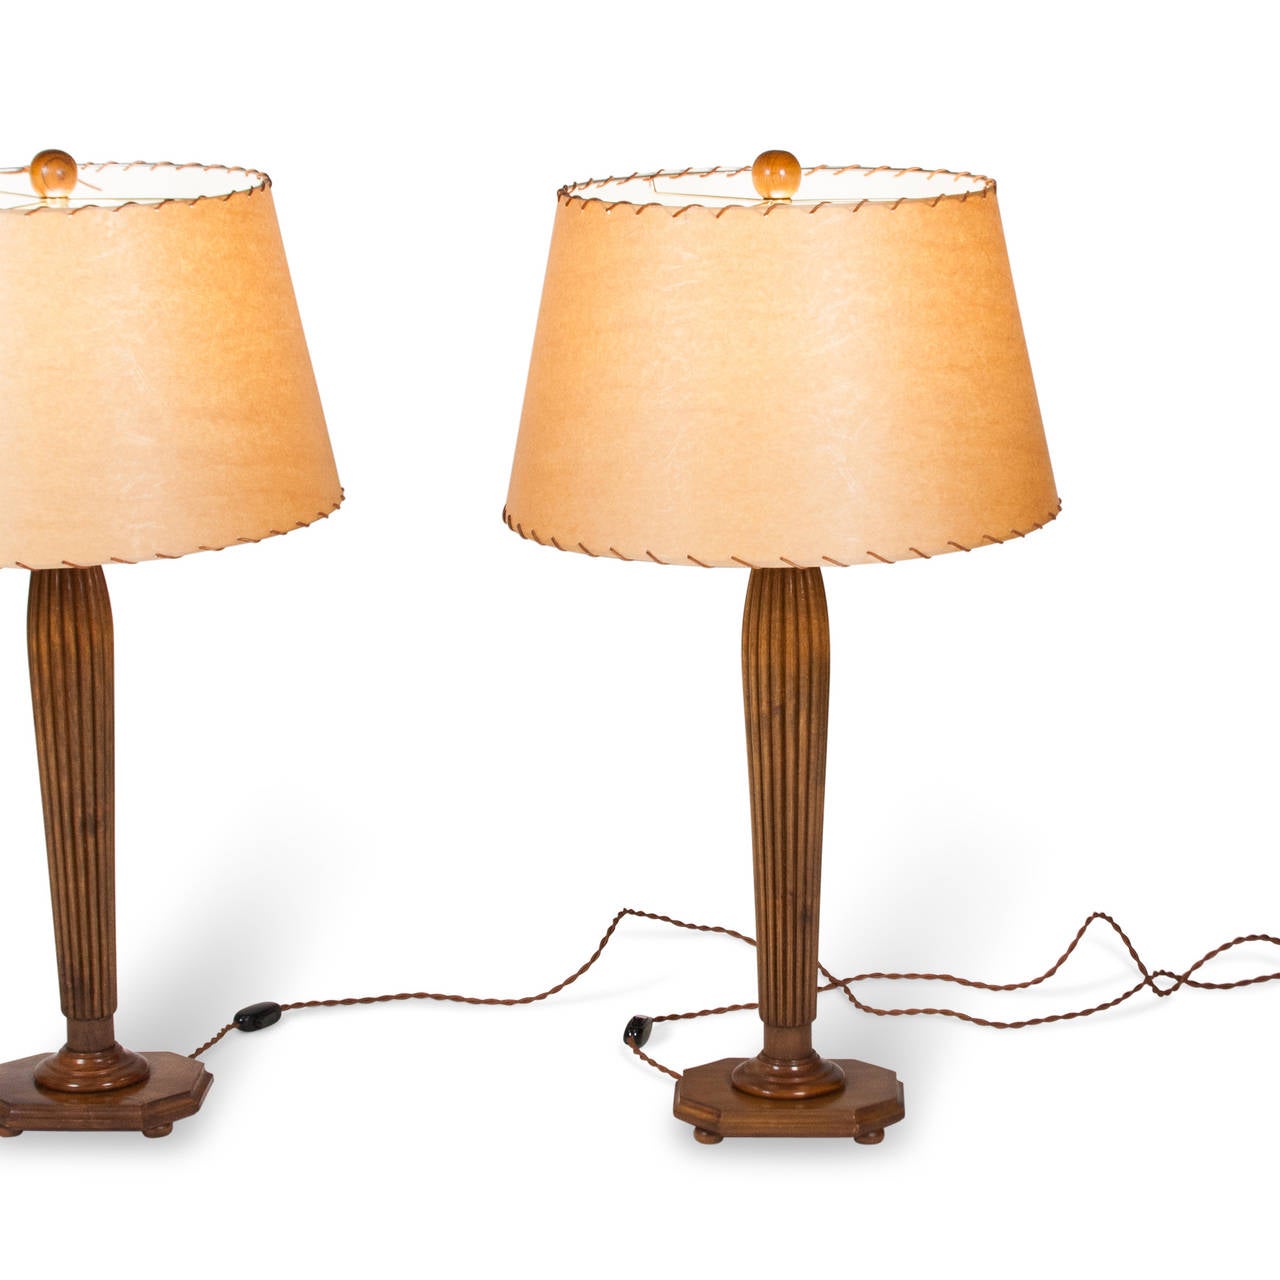 Italian Fluted Column Fruitwood Table Lamps, Pair In Excellent Condition For Sale In Brooklyn, NY